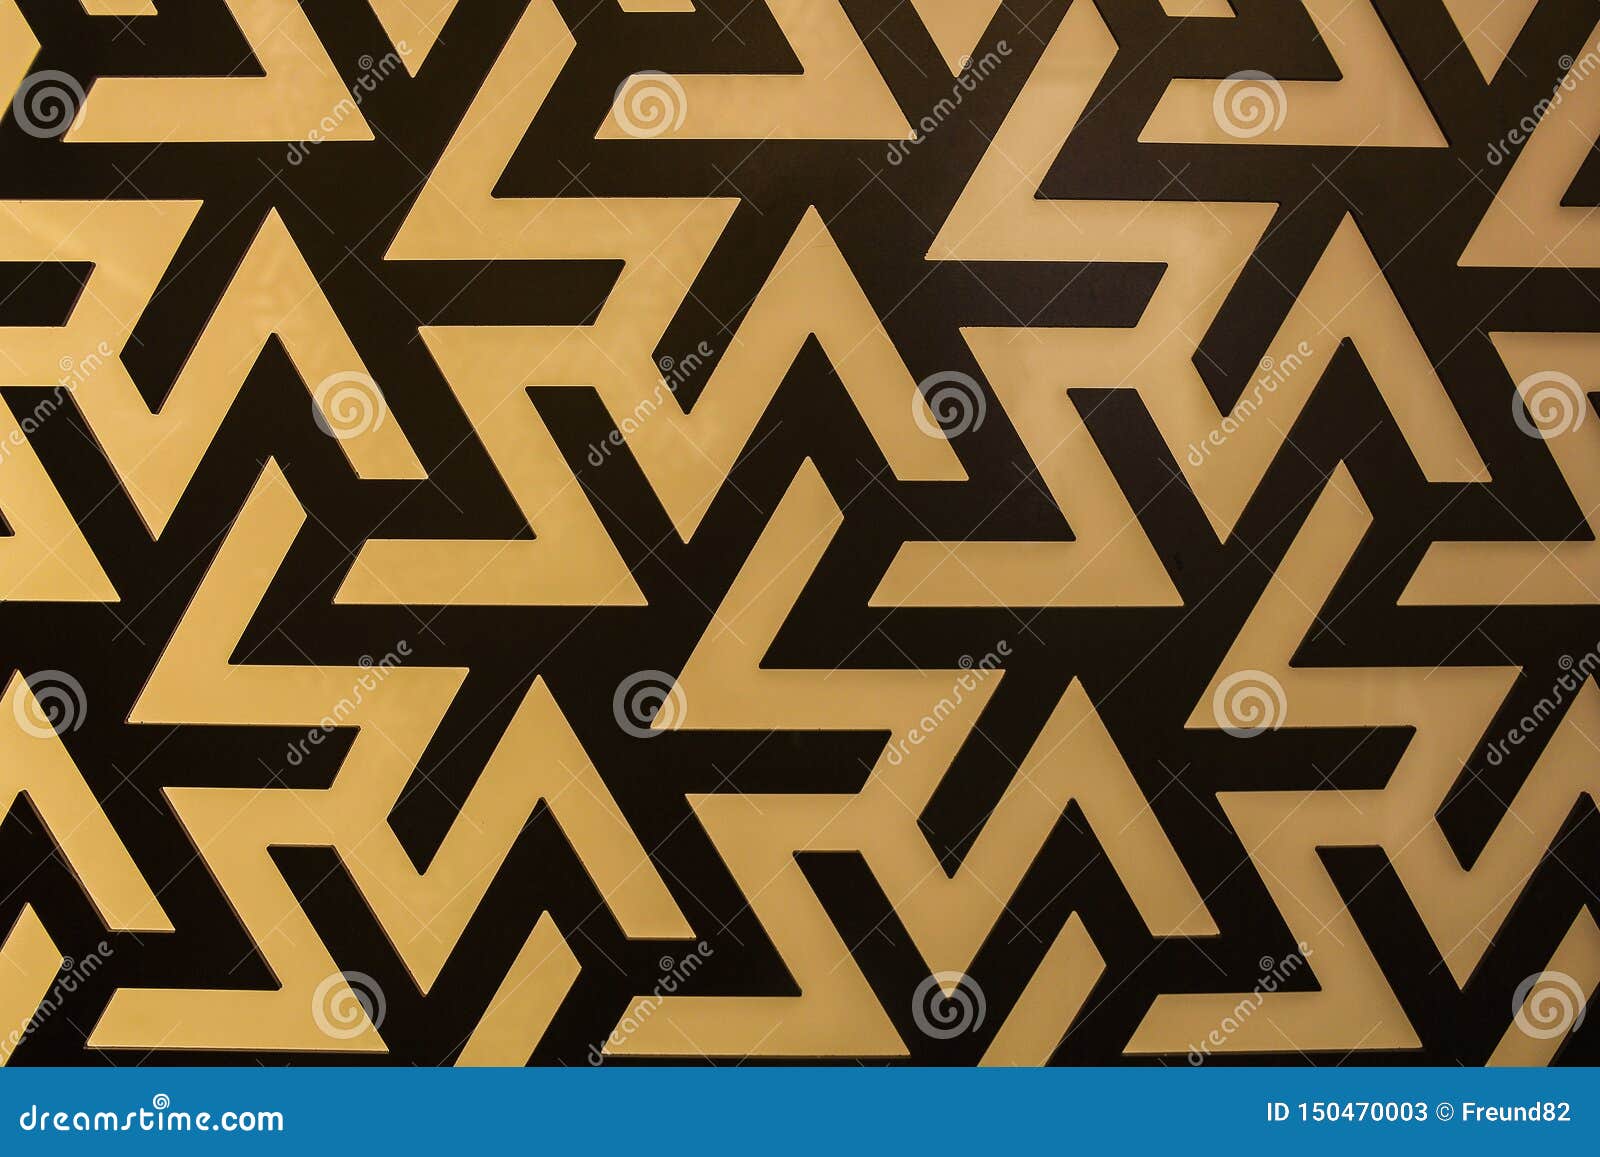 geometrical pattern with background